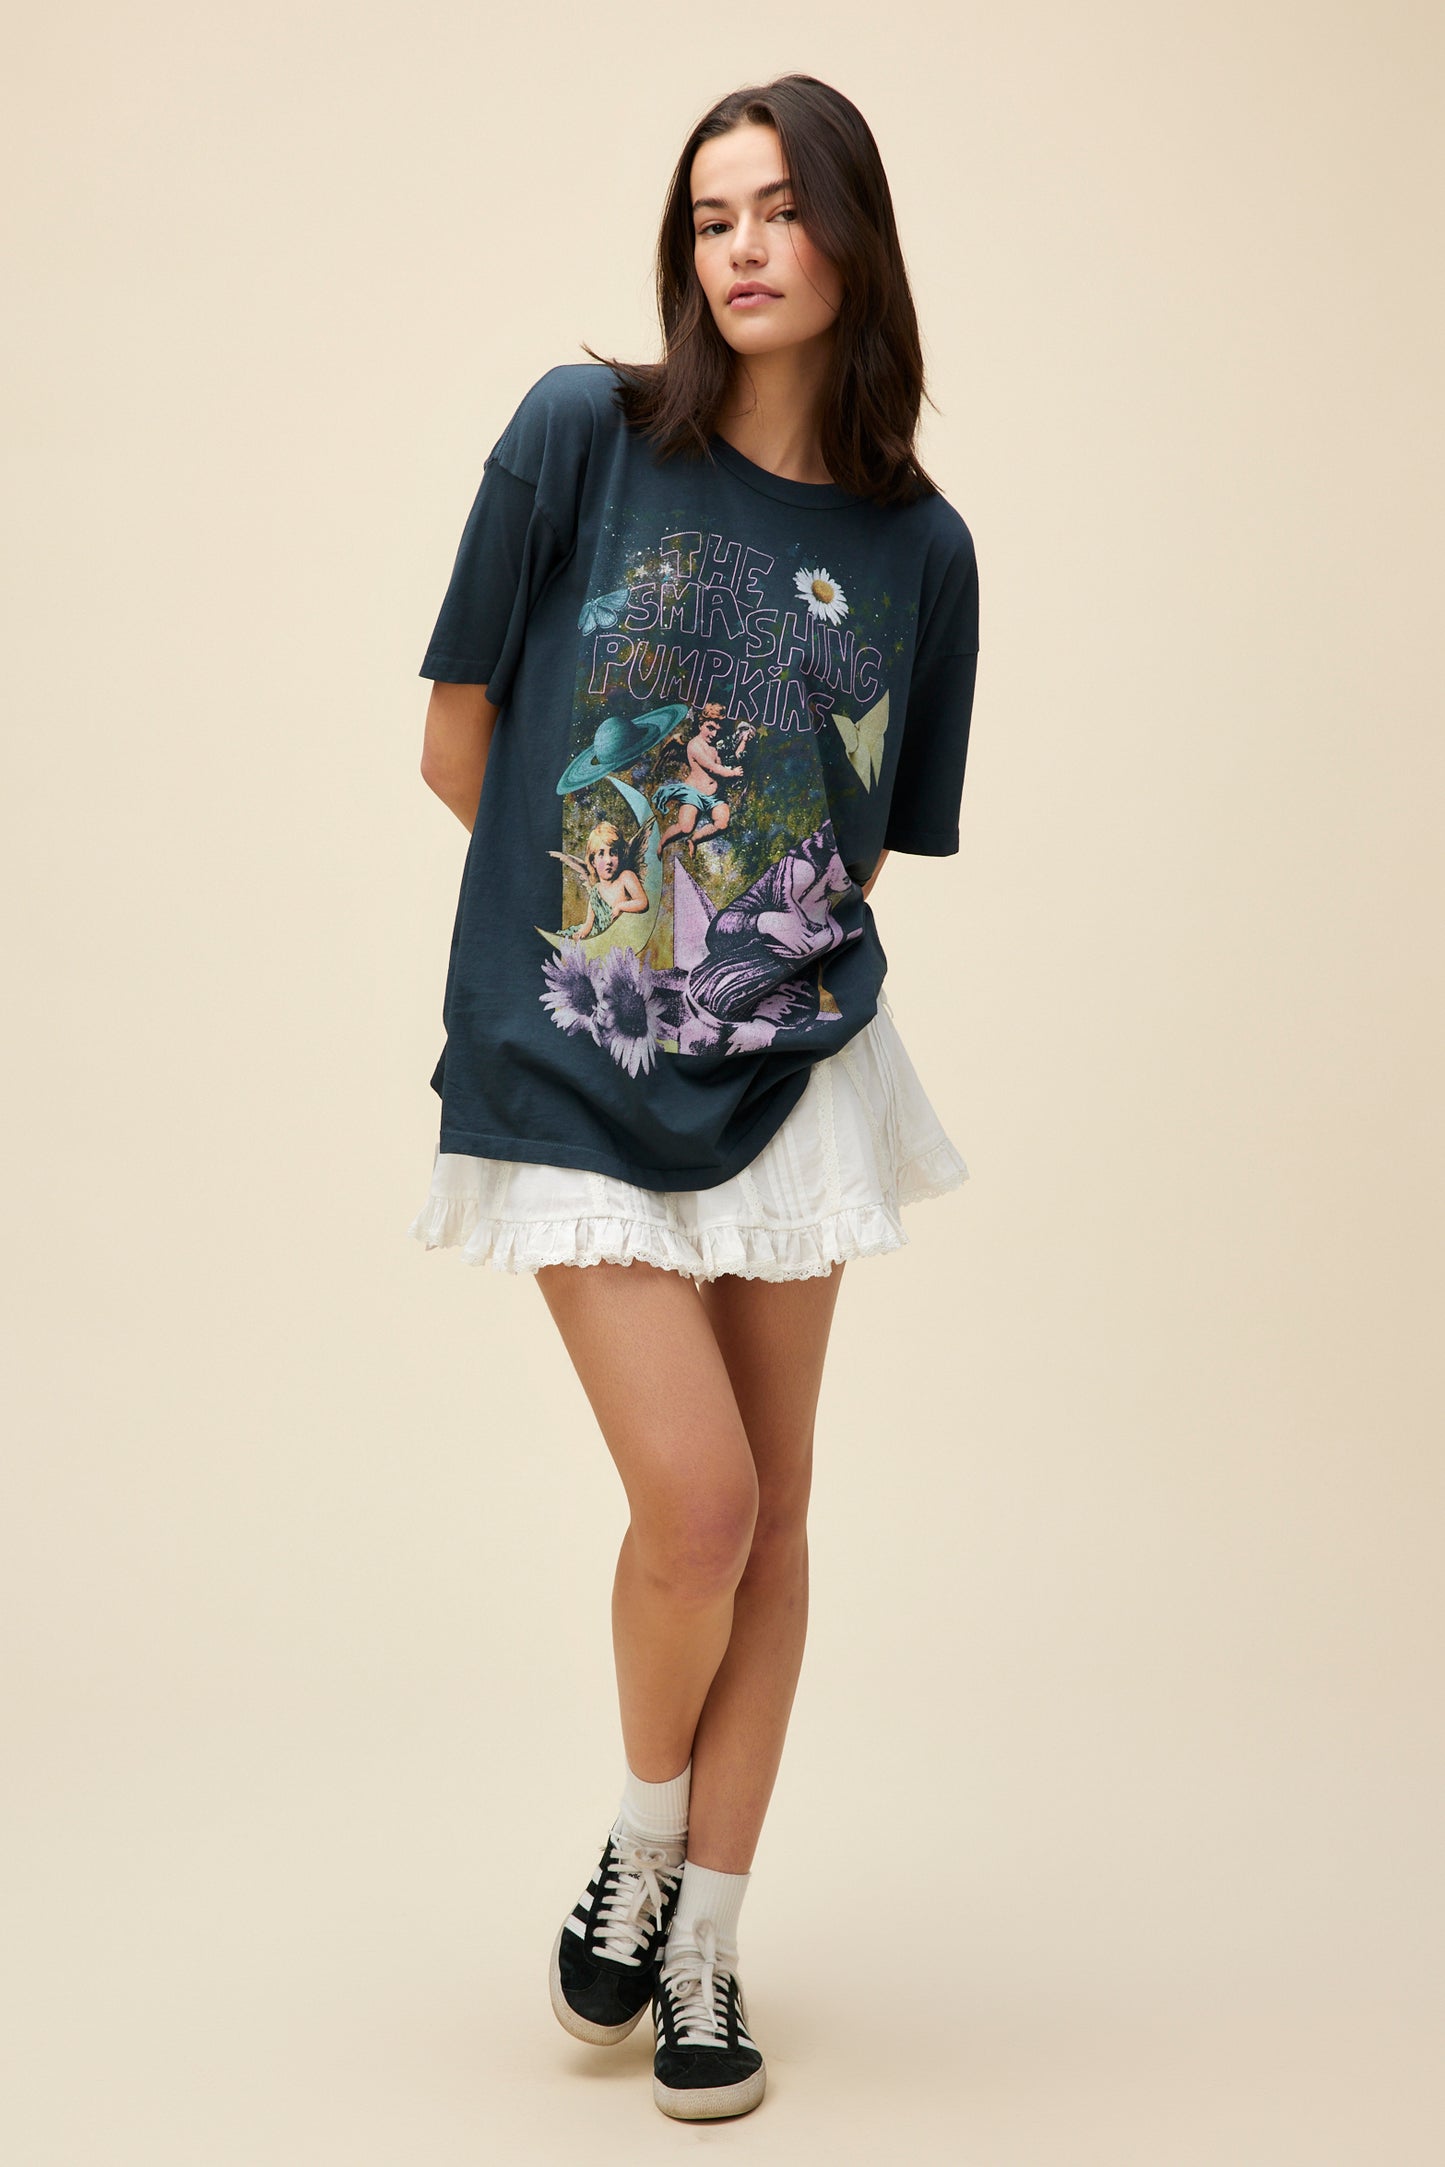 A model featuring a black tee designed with original artwork inspired by the album cover of "Mellon Collie and the Infinite Sadness". 